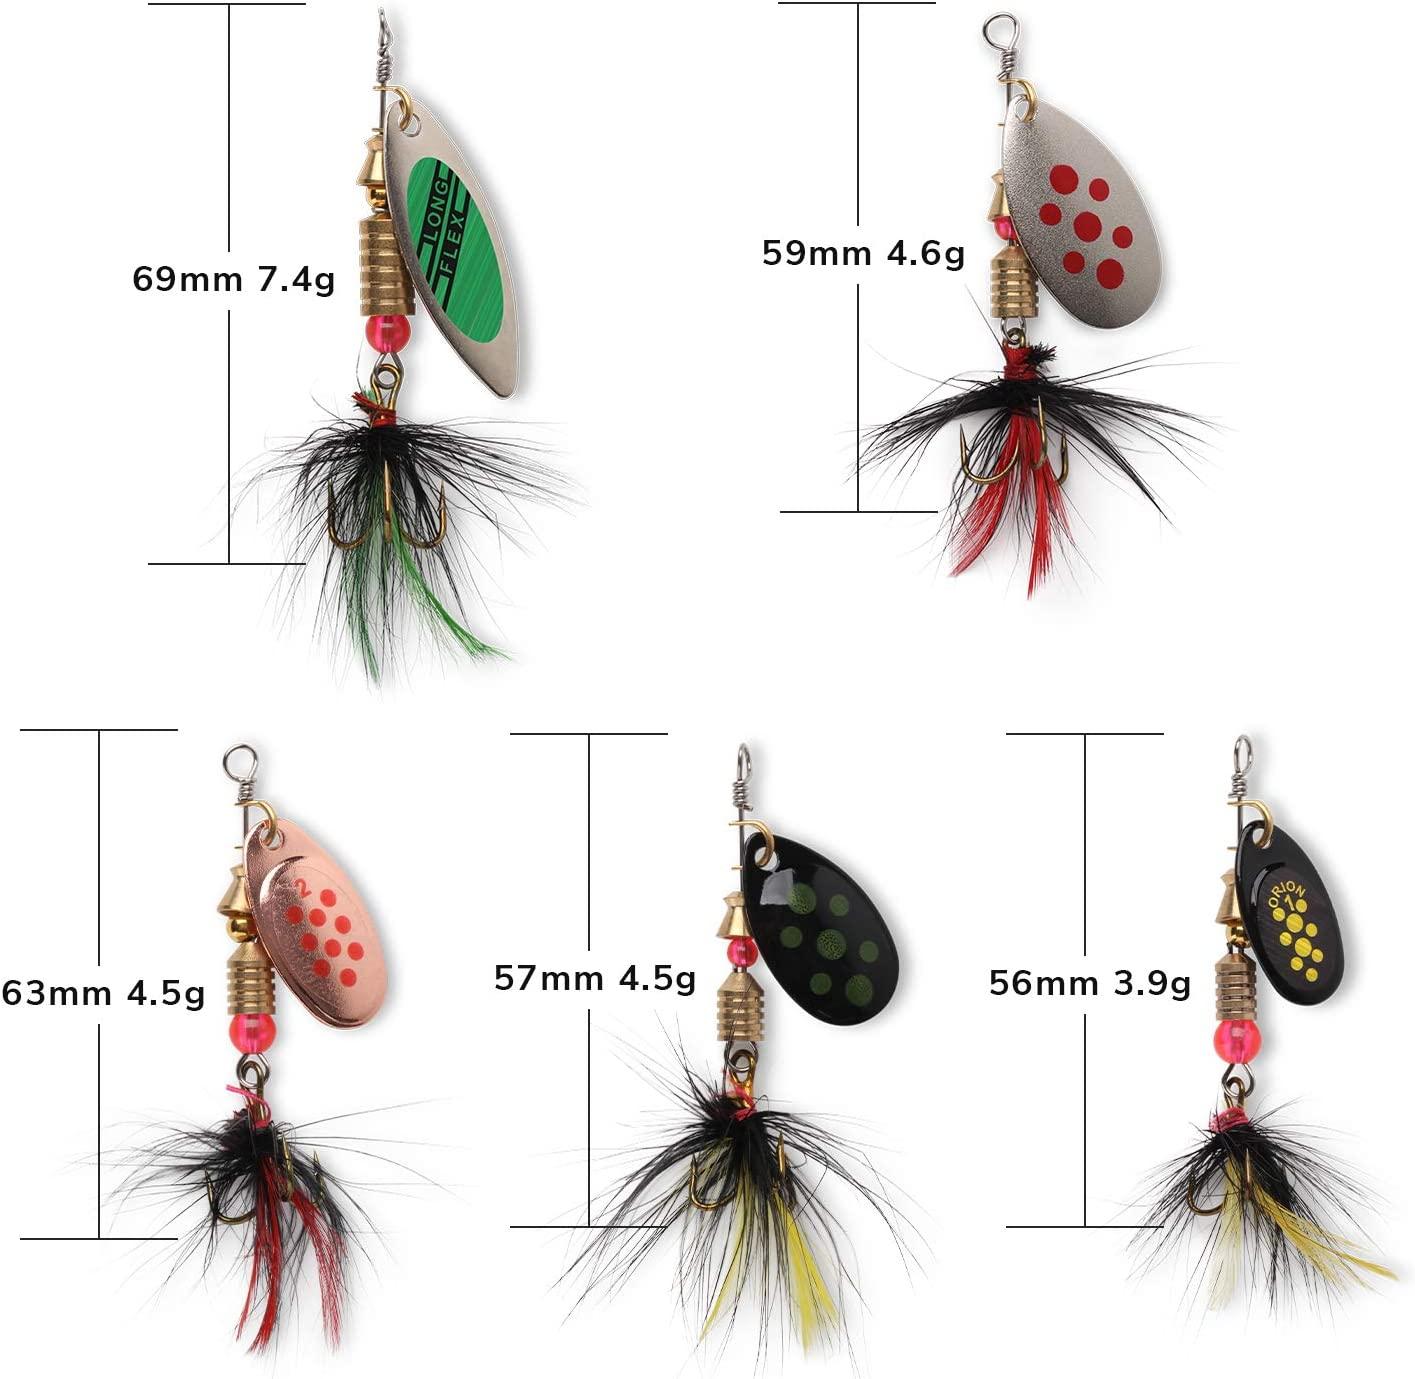  YISHANER 10pcs/Box Fishing Lure Spinnerbait, Bass Trout Salmon  Hard Metal Spinner Baits Kit with Tackle Box : Sports & Outdoors